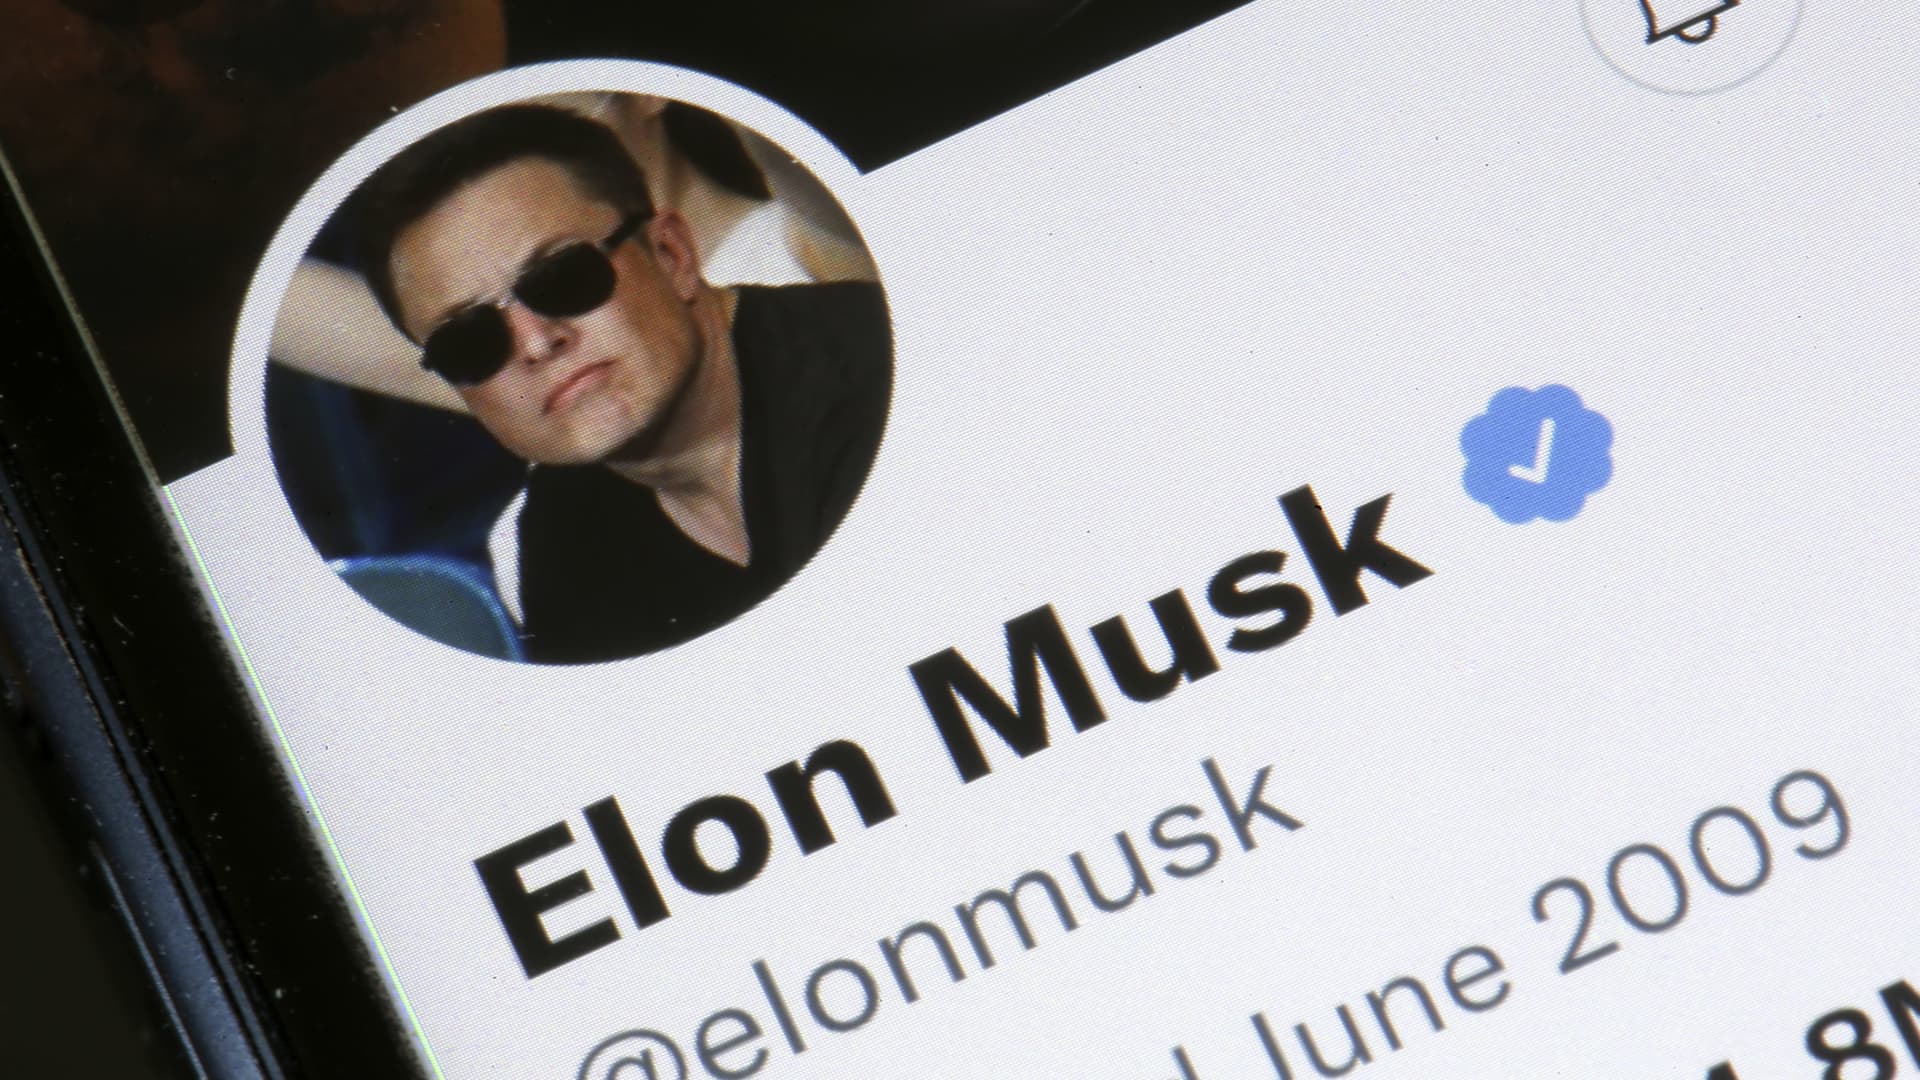 Elon Musk has mistaken method to depend fakes, unsolicited mail on Twitter: professionals